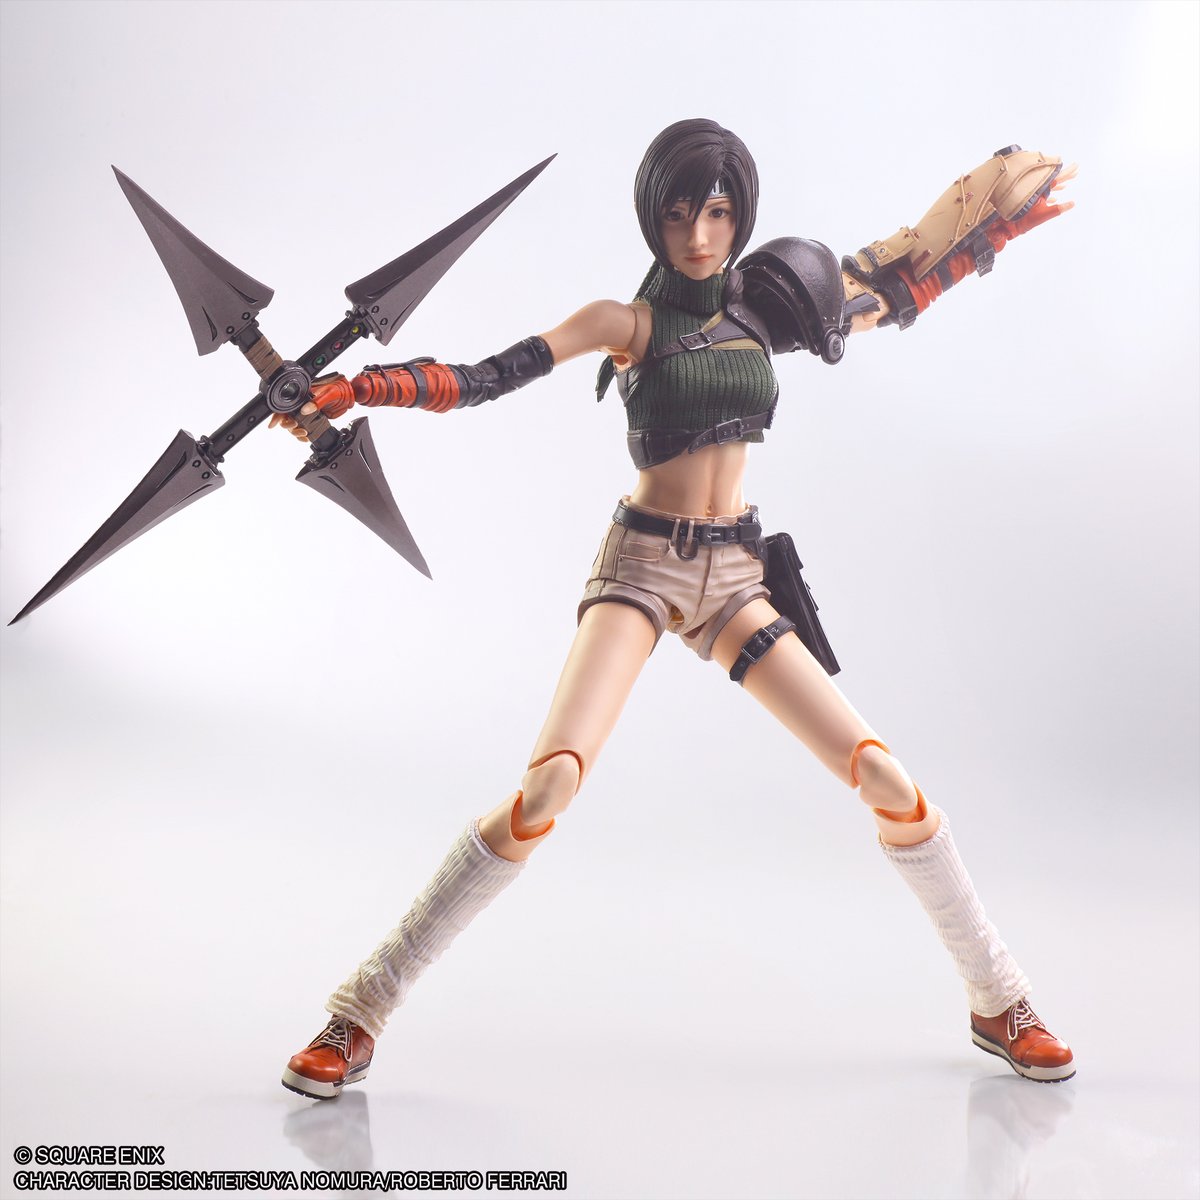 🌟 EPIC NEW RELEASE 🌟 Yuffie Kisaragi from #FinalFantasyVIIRebirth shines in her latest PLAY ARTS Kai figure! A treasure for any collector! 🖤 PREORDER TODAY 👉 bit.ly/3QuU1mK 🖤